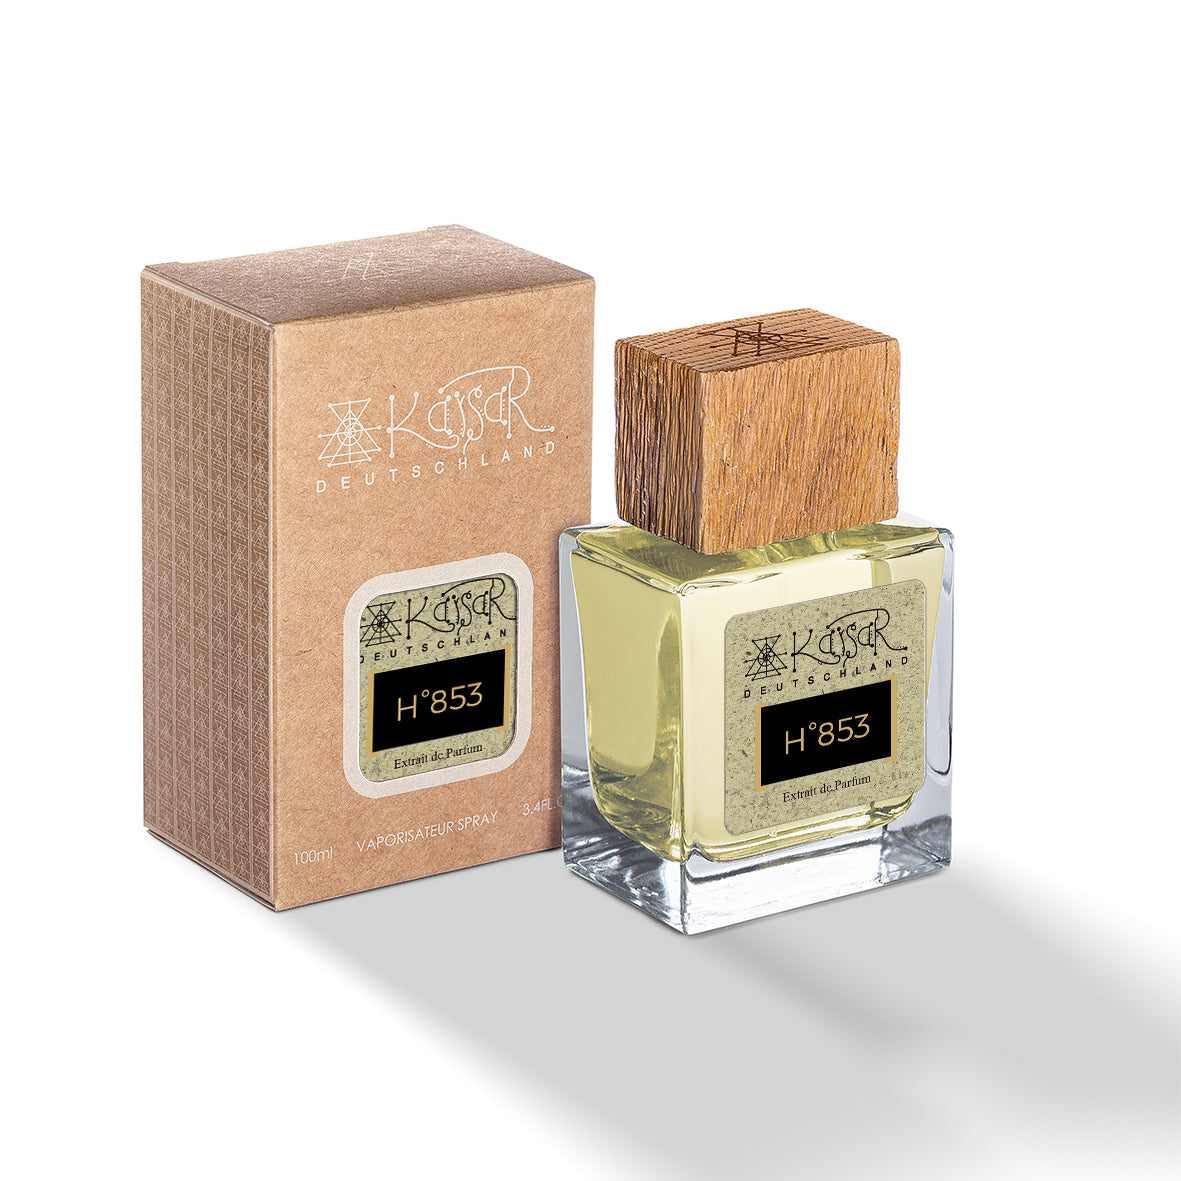 H°853 The One Man Gold Scent